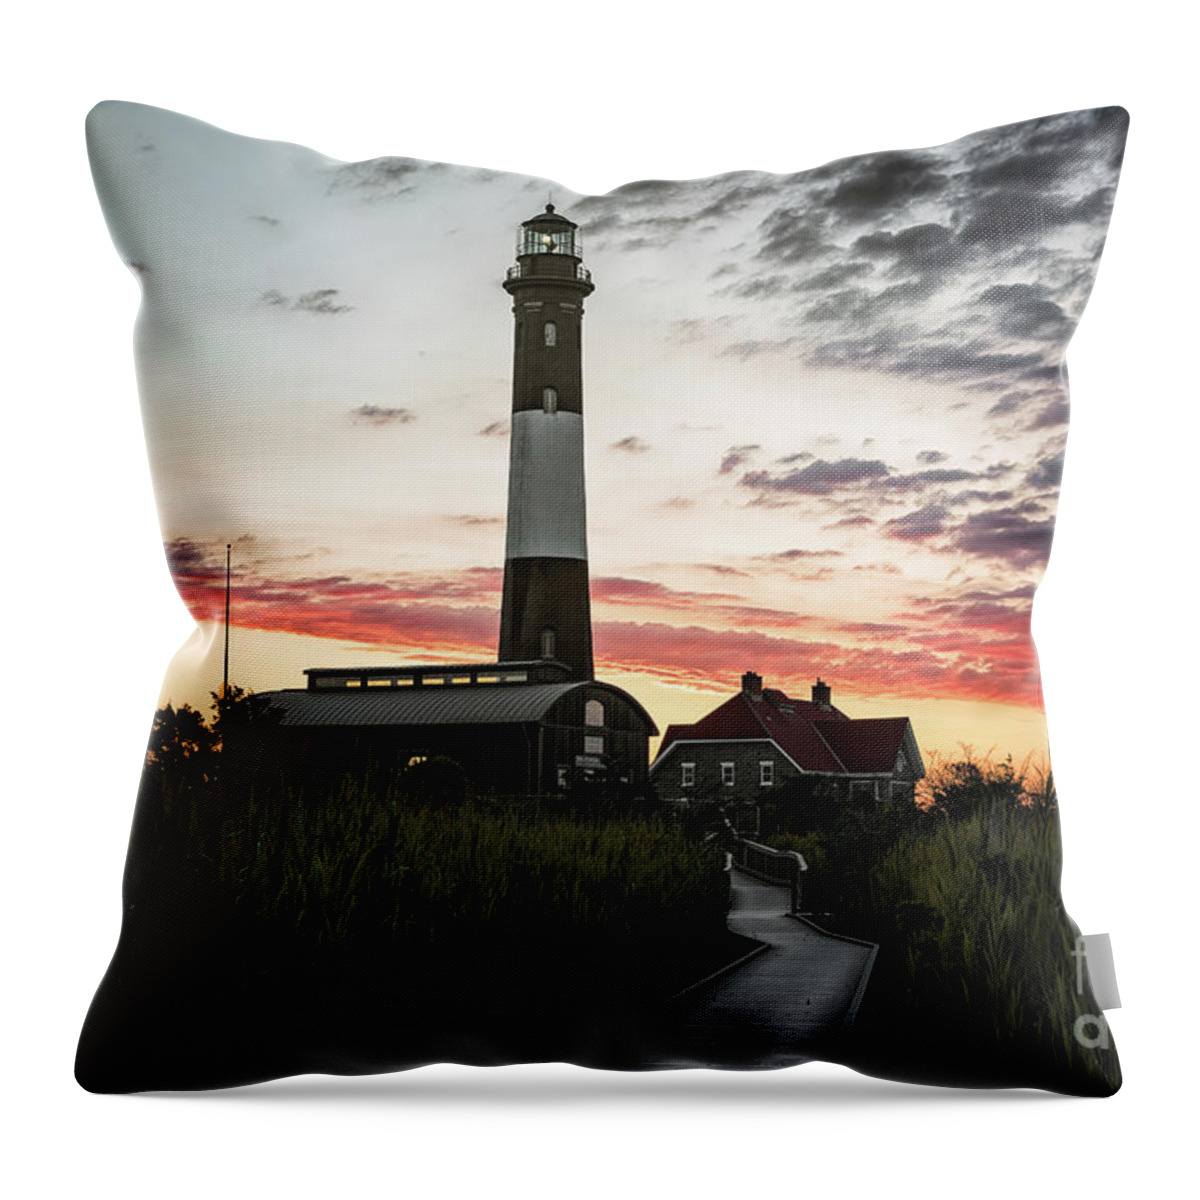 Fire Island Lighthouse Throw Pillow featuring the photograph Fire Island Lighthouse Sunrise by Alissa Beth Photography